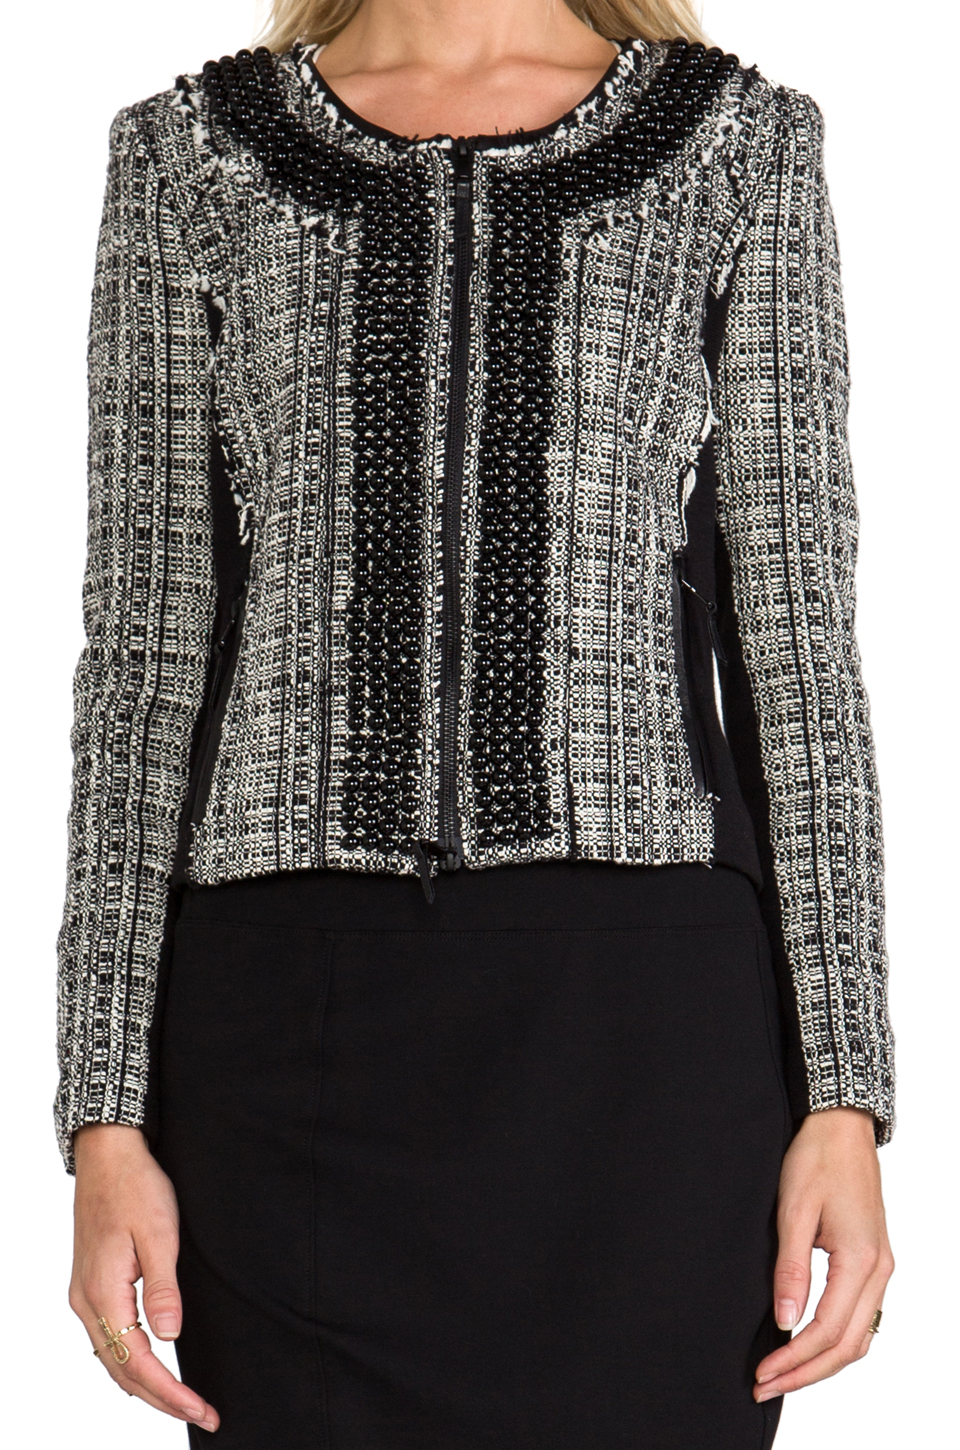 Lyst - Milly Black and White Tweed Jacket in Black in Gray